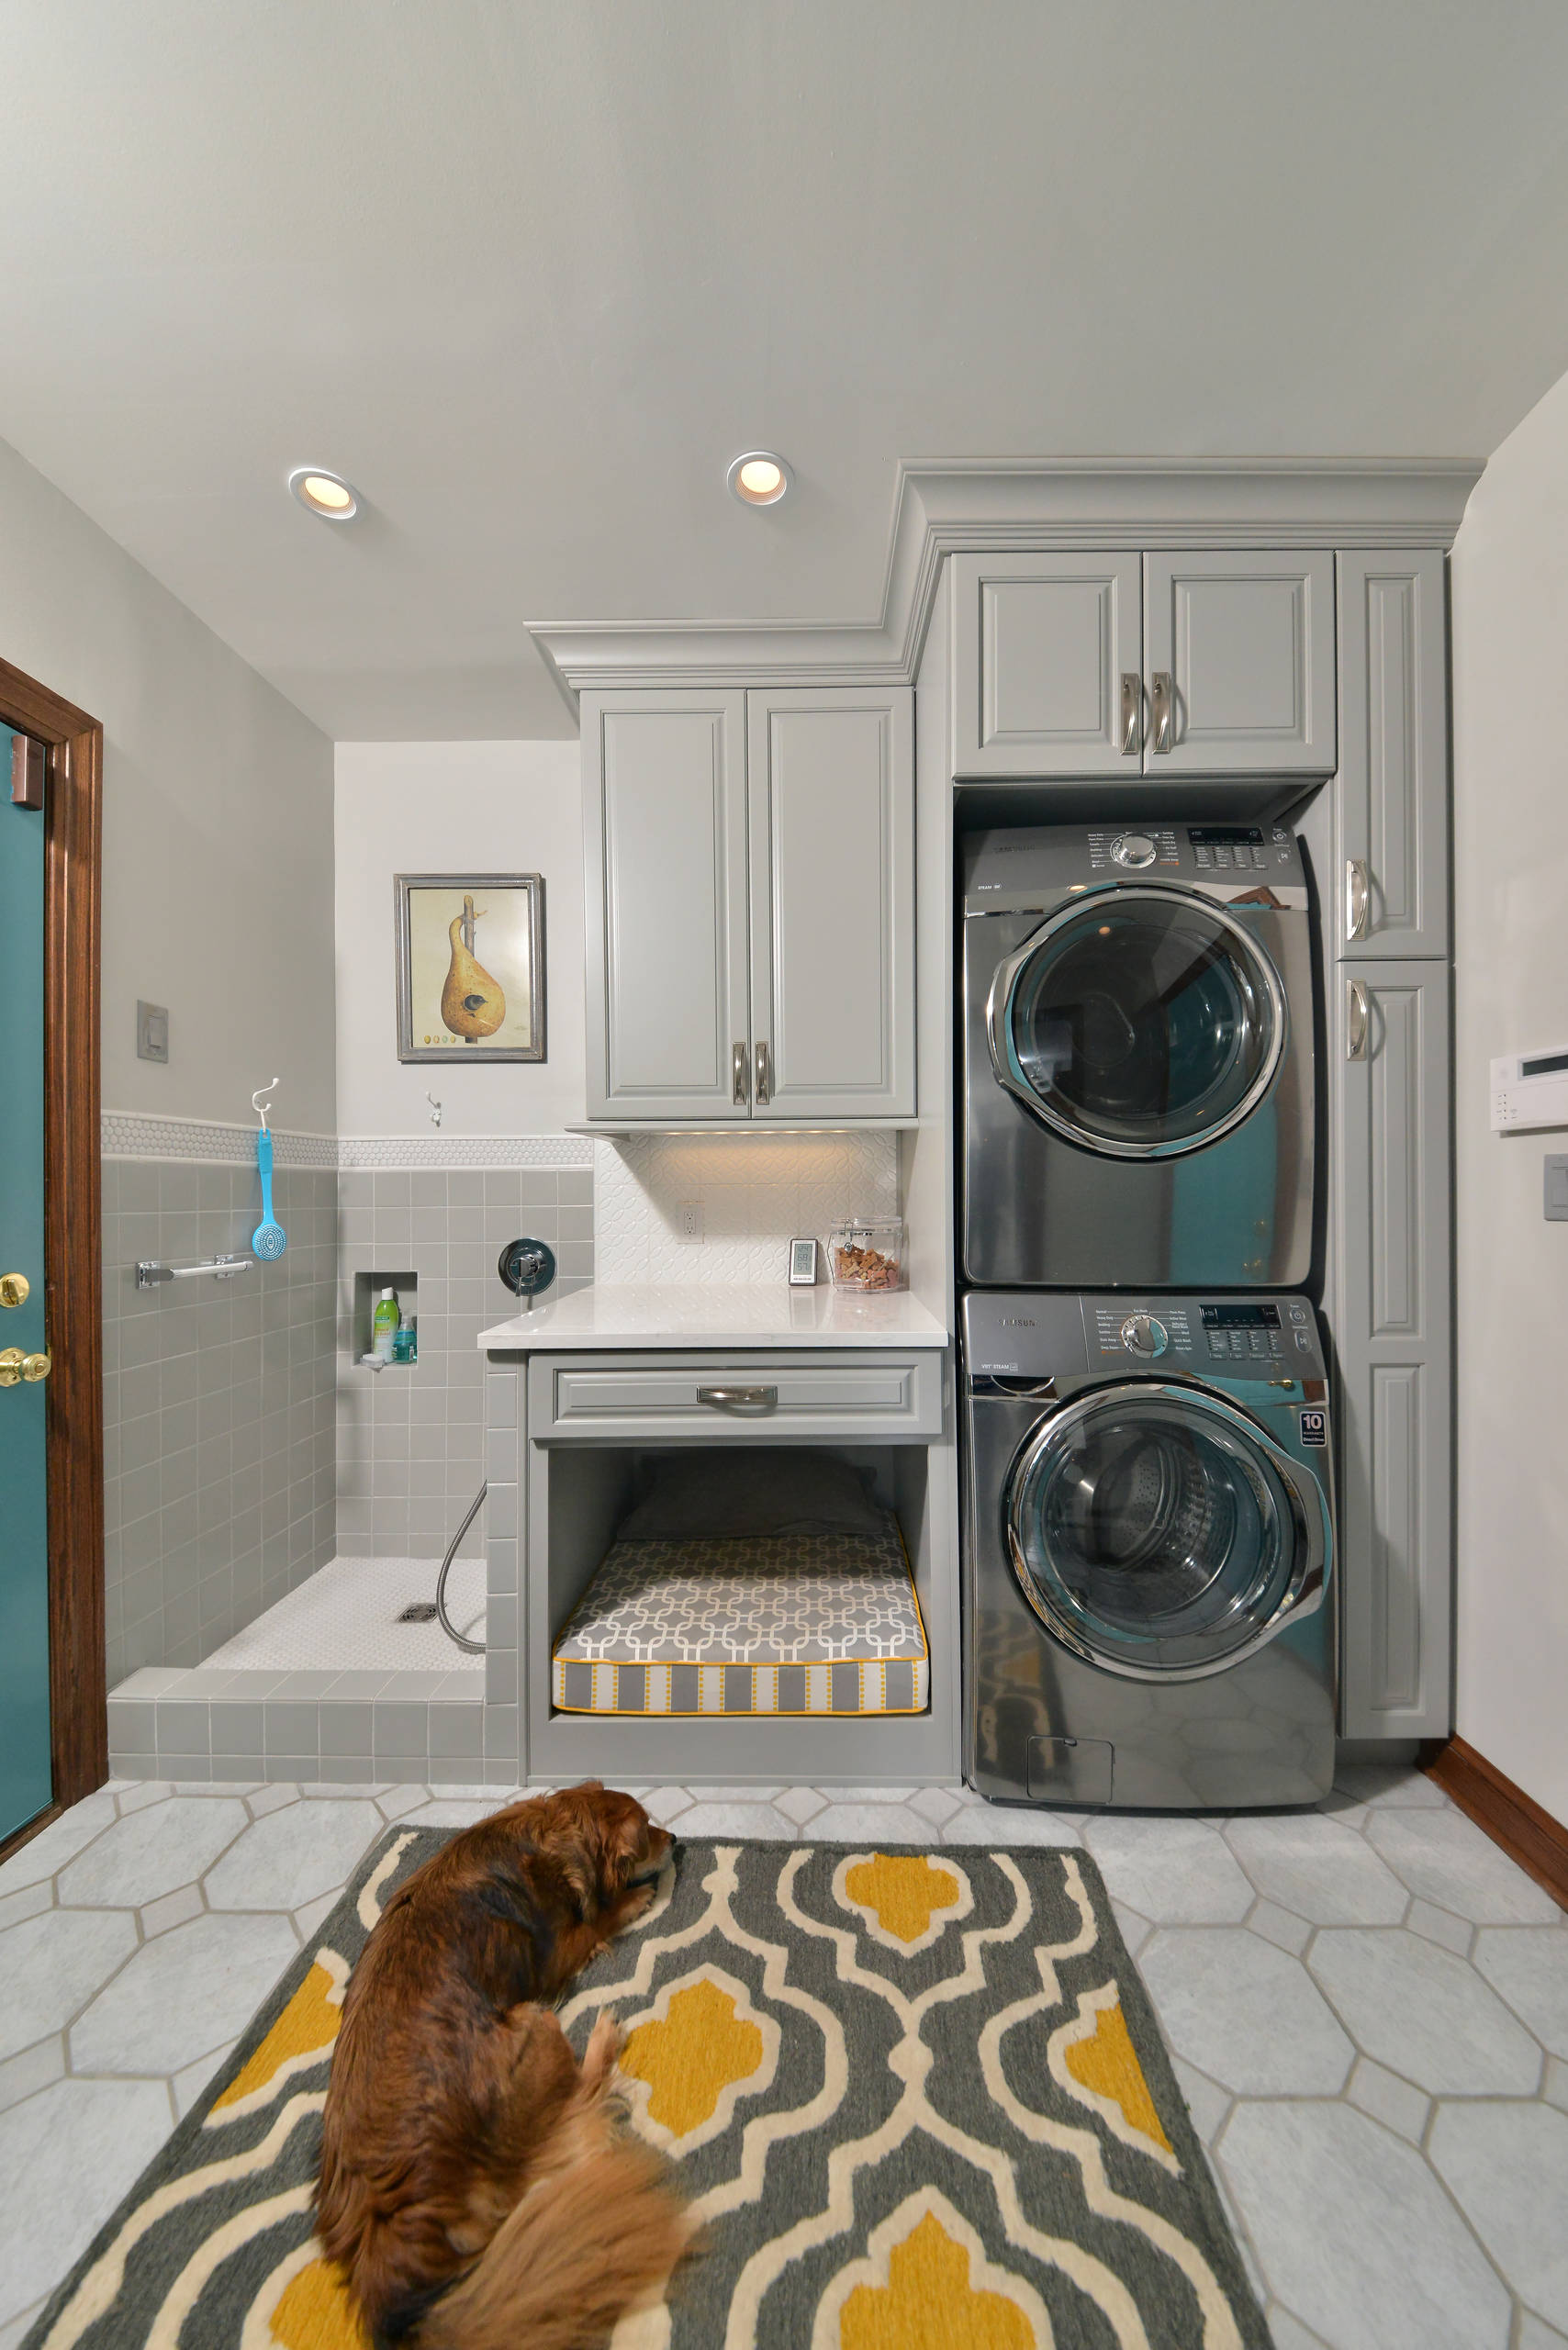 https://st.hzcdn.com/simgs/pictures/laundry-rooms/dogs-dream-artistic-renovations-of-ohio-llc-img~8c21ee2e046ac483_14-7662-1-2e08054.jpg